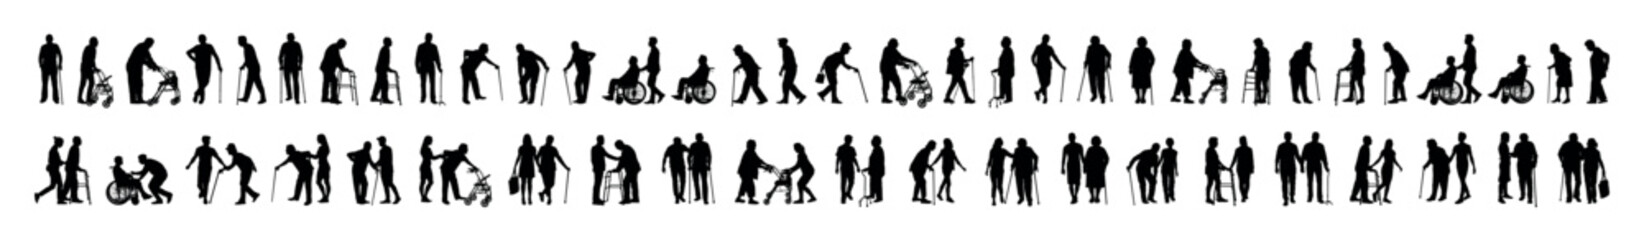 Group of elderly people with walking aids in different poses vector silhouette set collection.